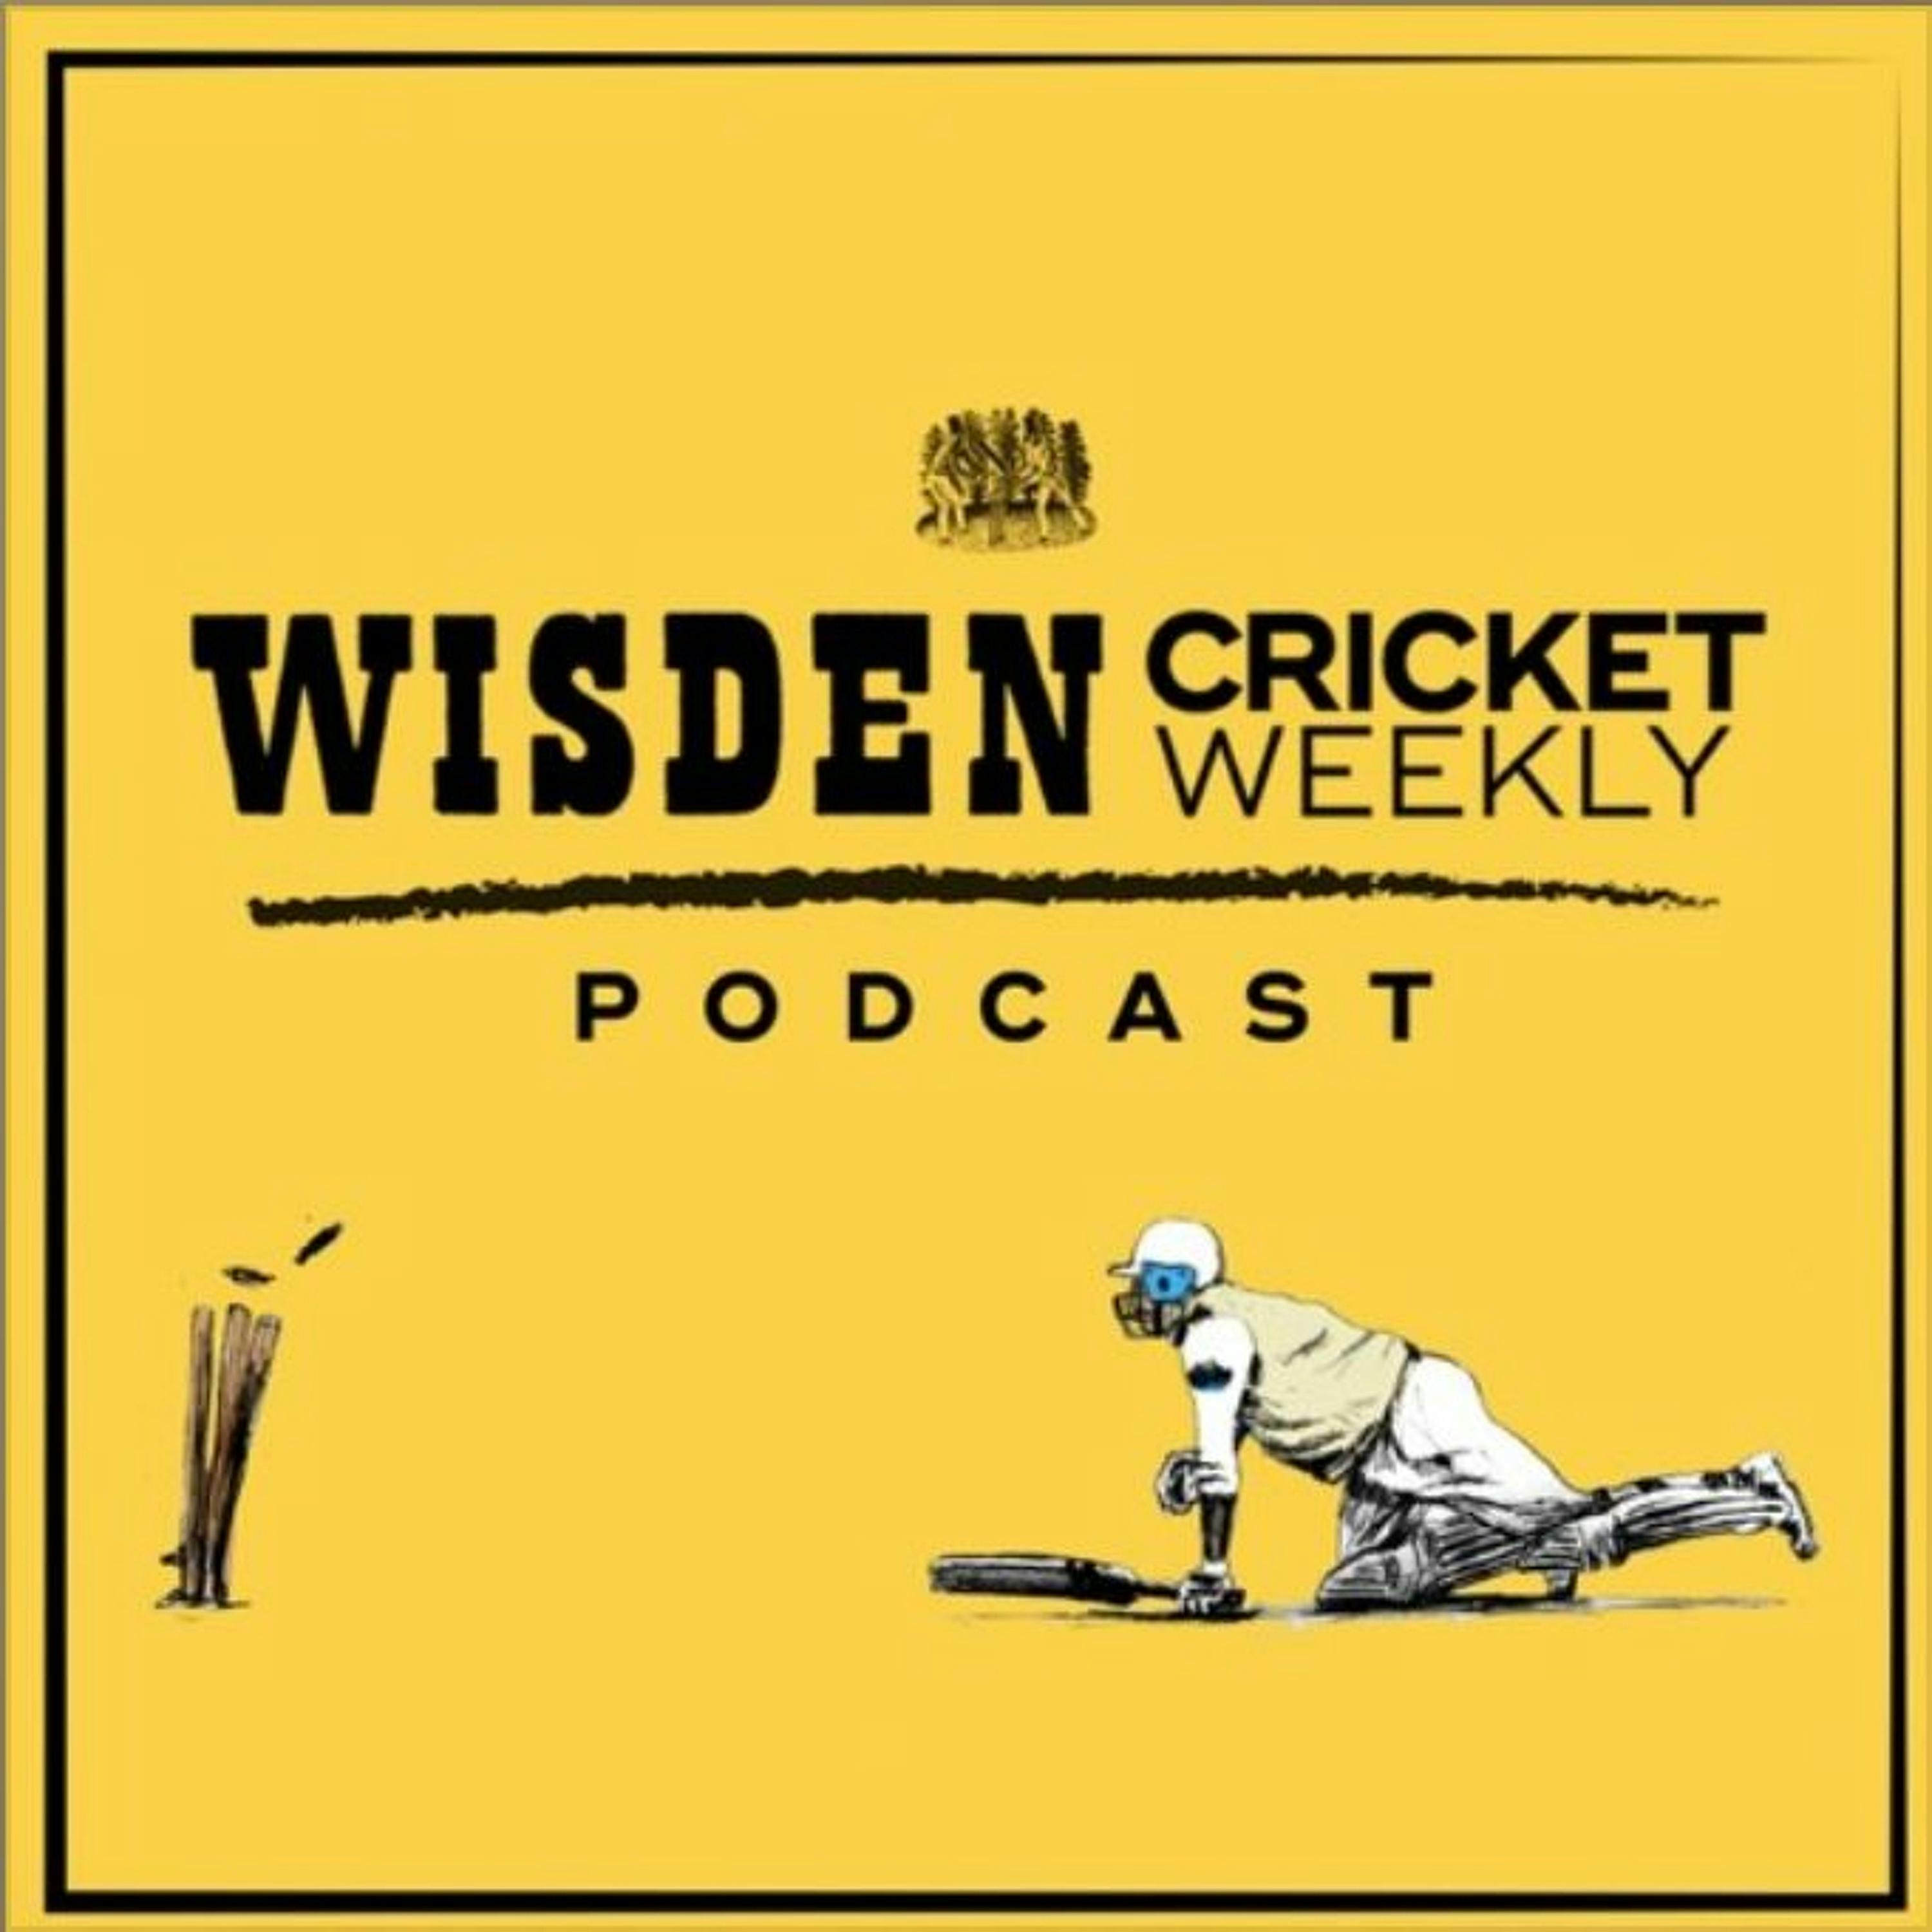 The Wisden Test Team of the 1990s